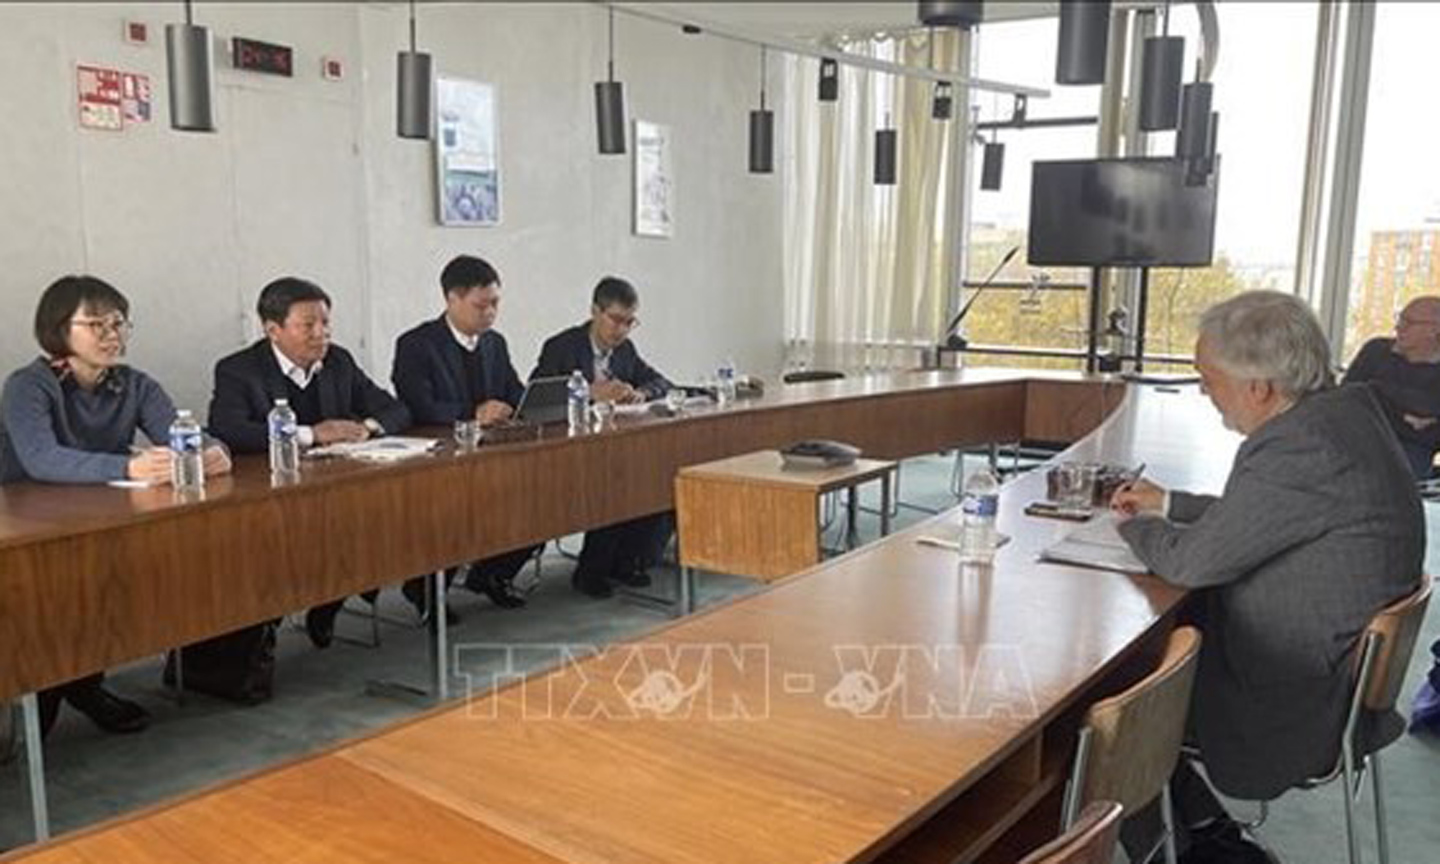 At the working session between the Vietnamese delegation and member of the Politburo of the French Communist Party (PCF) Taylan Coskun. (Photo: VNA).